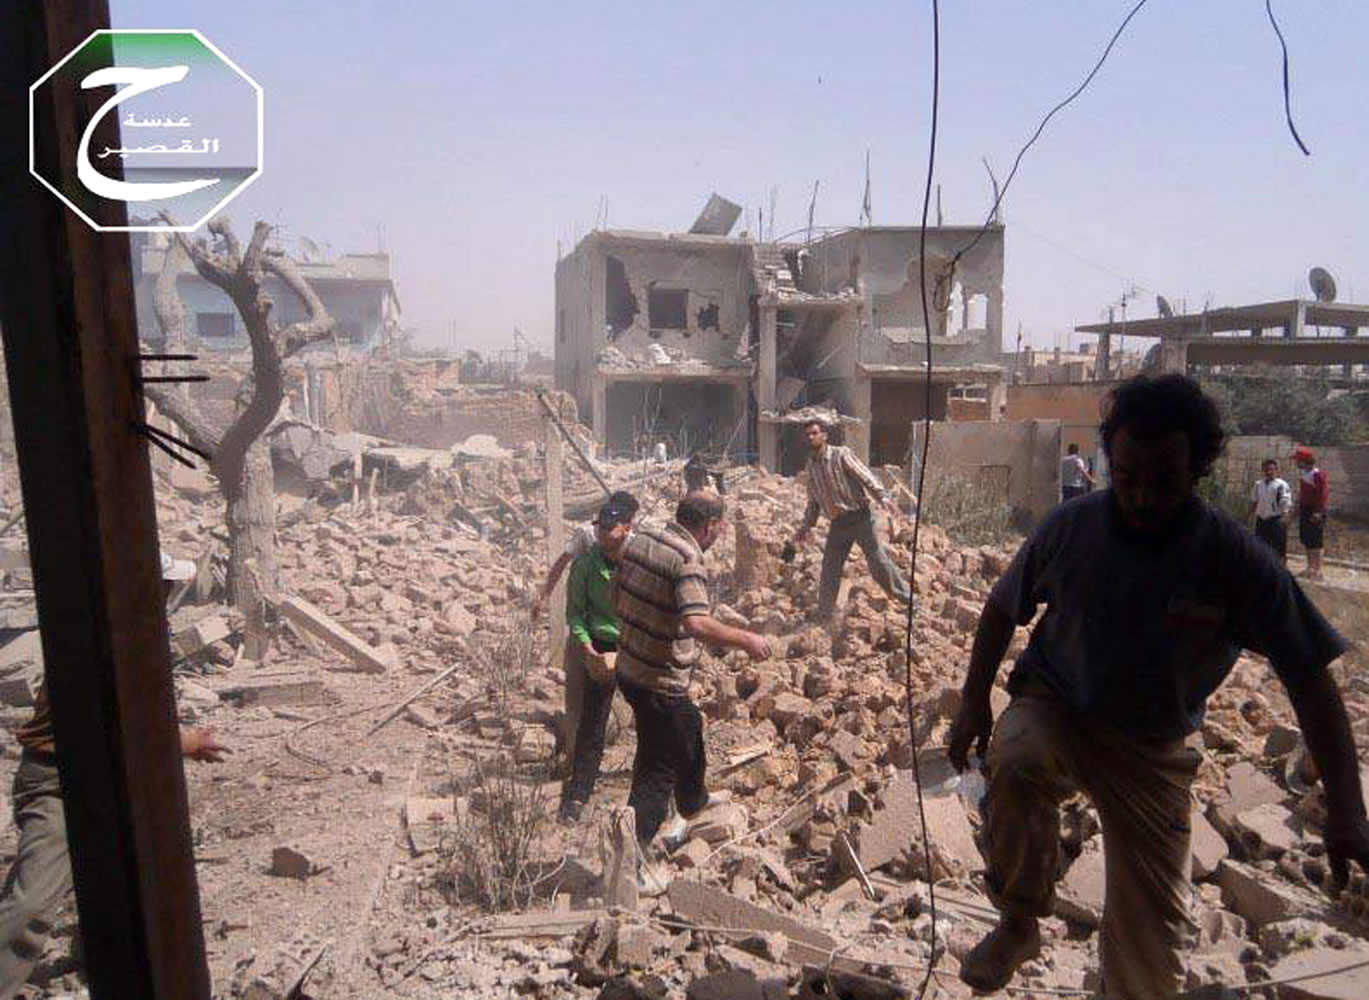 In this citizen journalism image provided by Qusair Lens, which has been authenticated based on its contents and other AP reporting, Syrians inspect the rubble of damaged buildings due to government airstrikes Saturday in Qusair, Homs province, Syria.